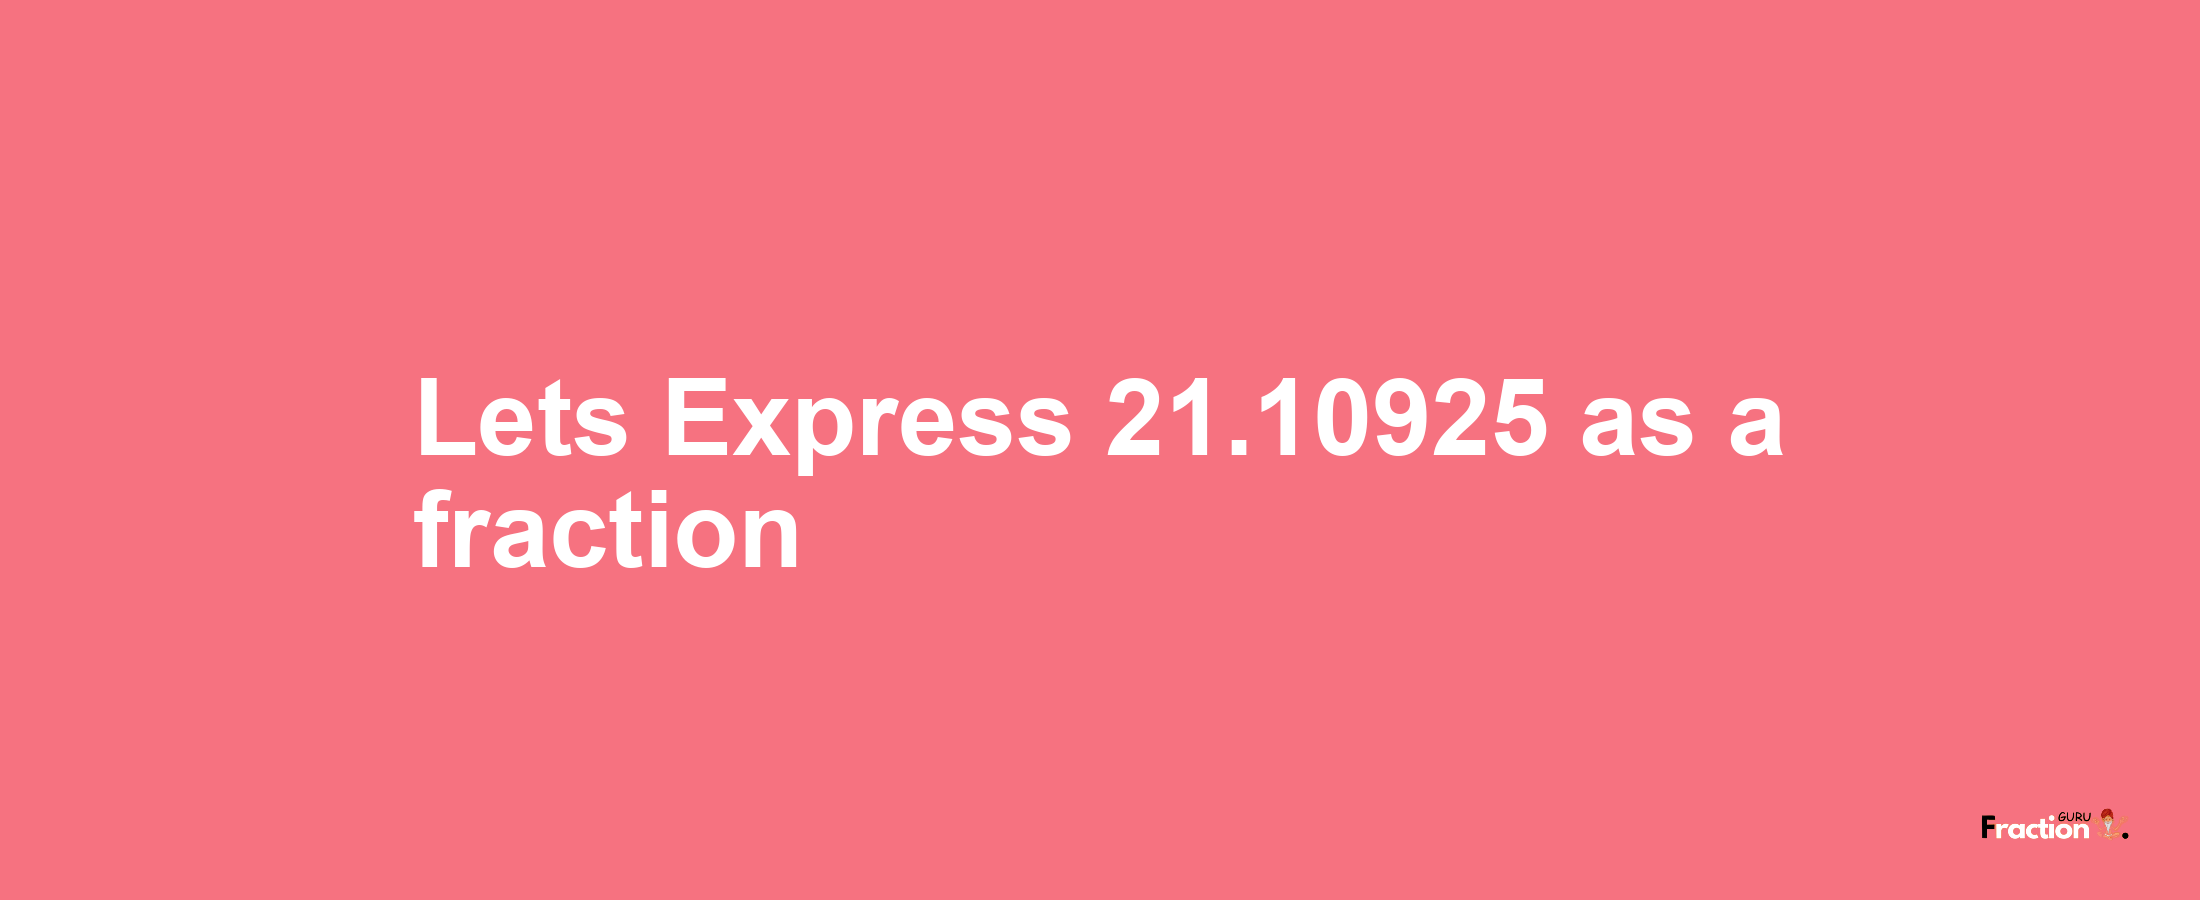 Lets Express 21.10925 as afraction